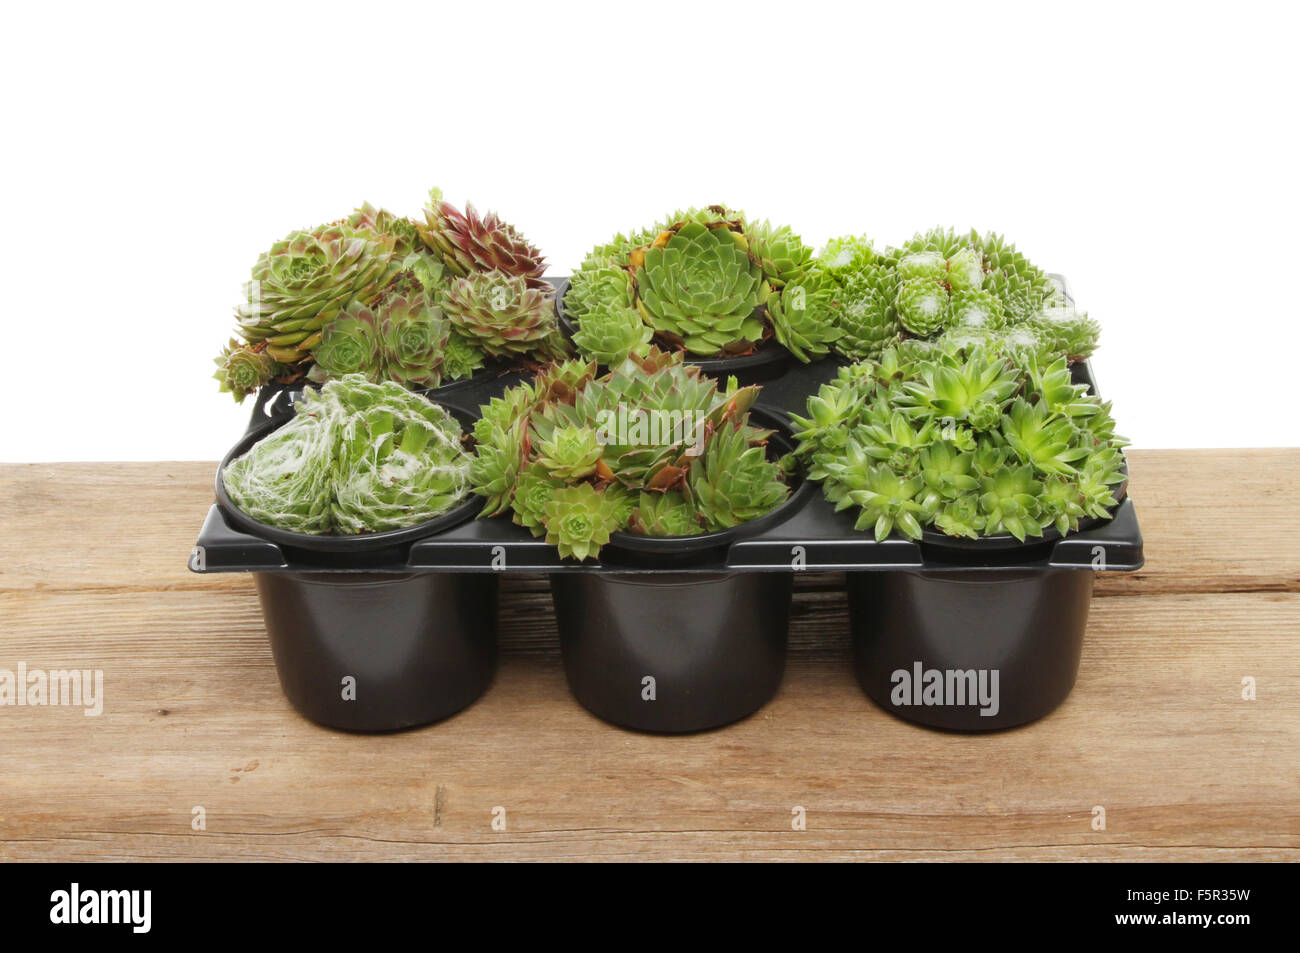 Sempervivum plants in a tray on a wooden boad Stock Photo